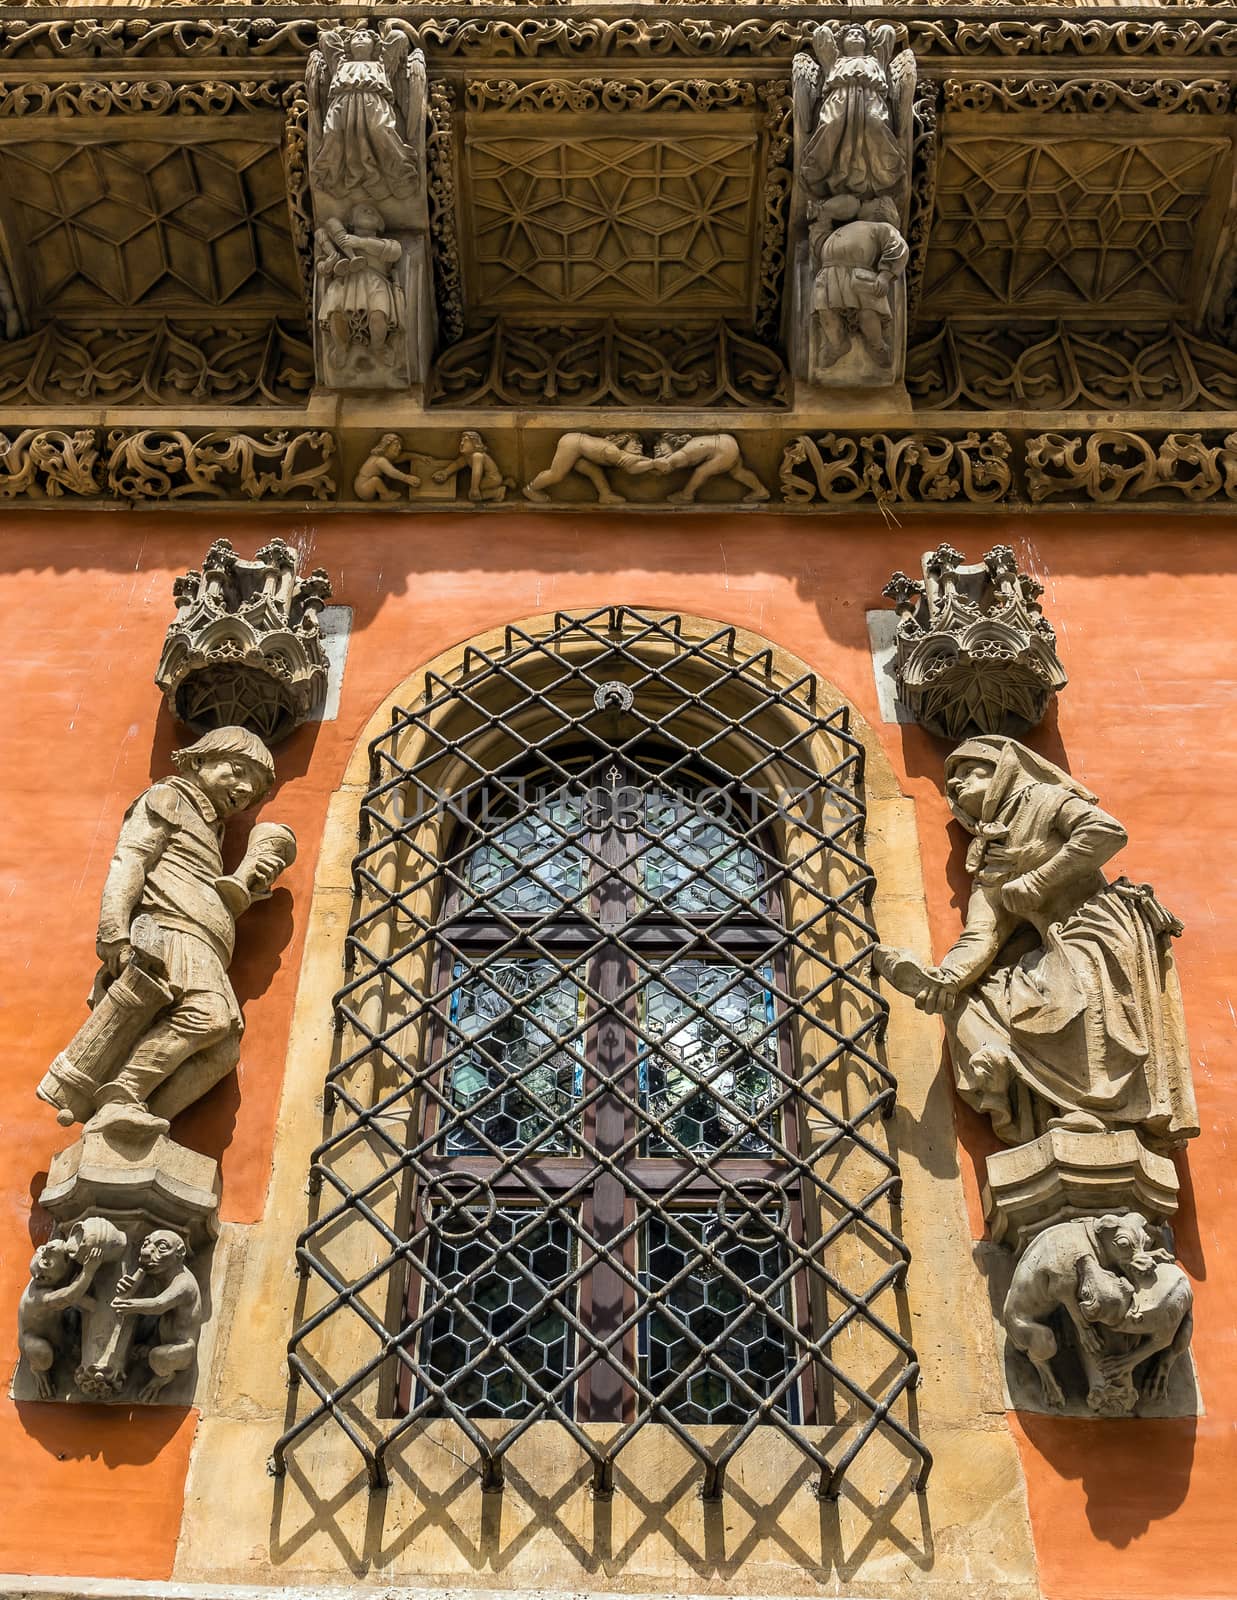 Sculptures and architectural details on the Old Town Hall in the Market Square in Wroclaw, Poland.